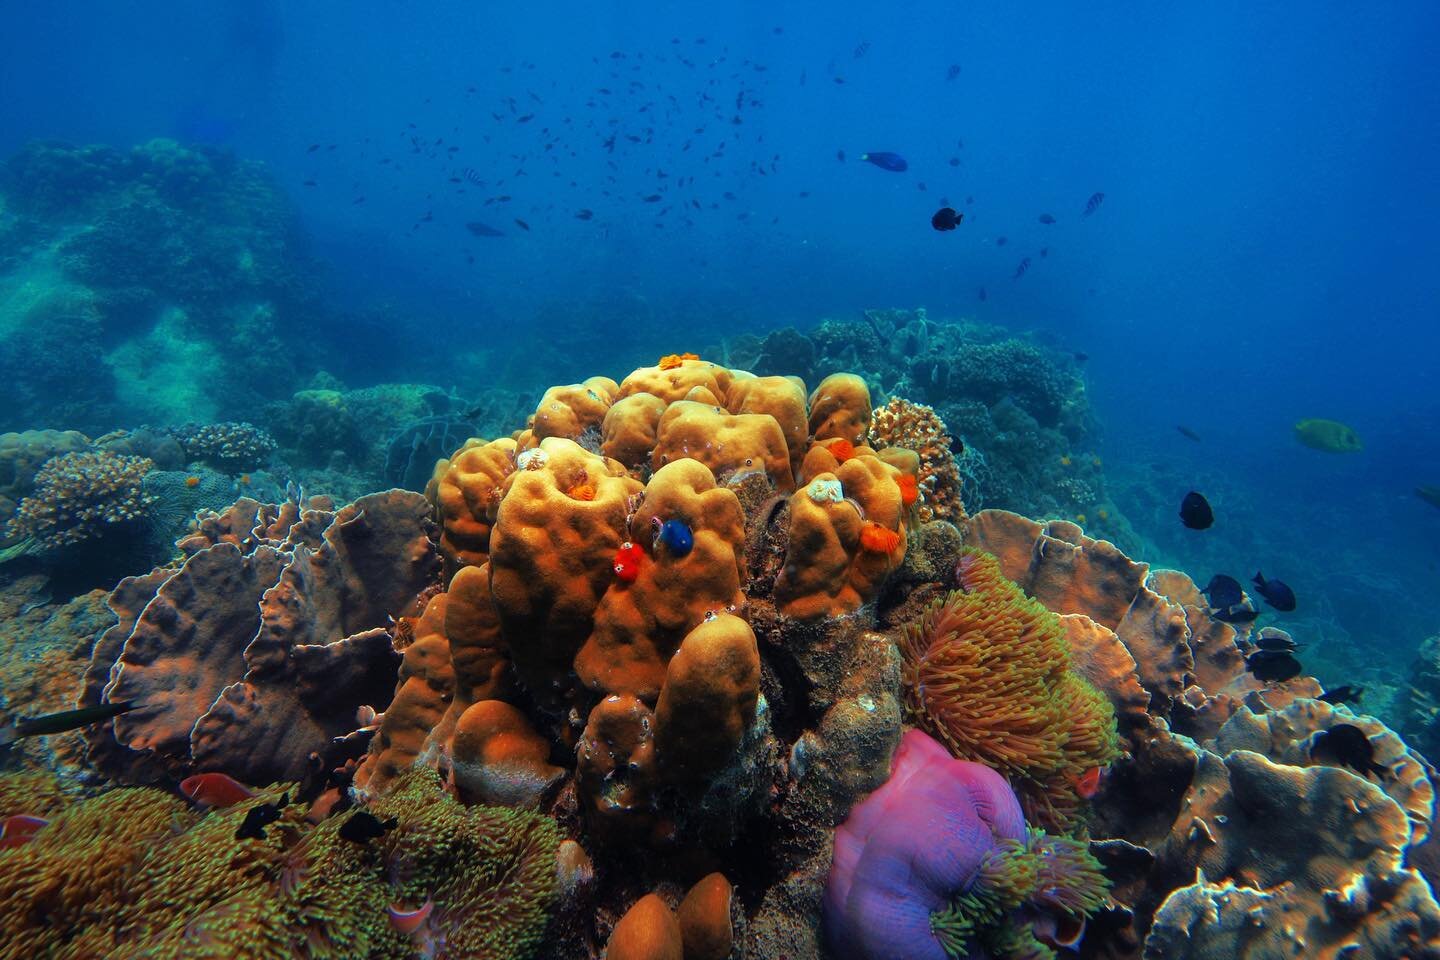 In honour of World Oceans Day tomorrow, we&rsquo;re reflecting on why the protection of our waters is so important, with our friends at @discoversoneva. Coral reefs are a vital marine ecosystem, providing habitat for over a quarter of the world&rsquo